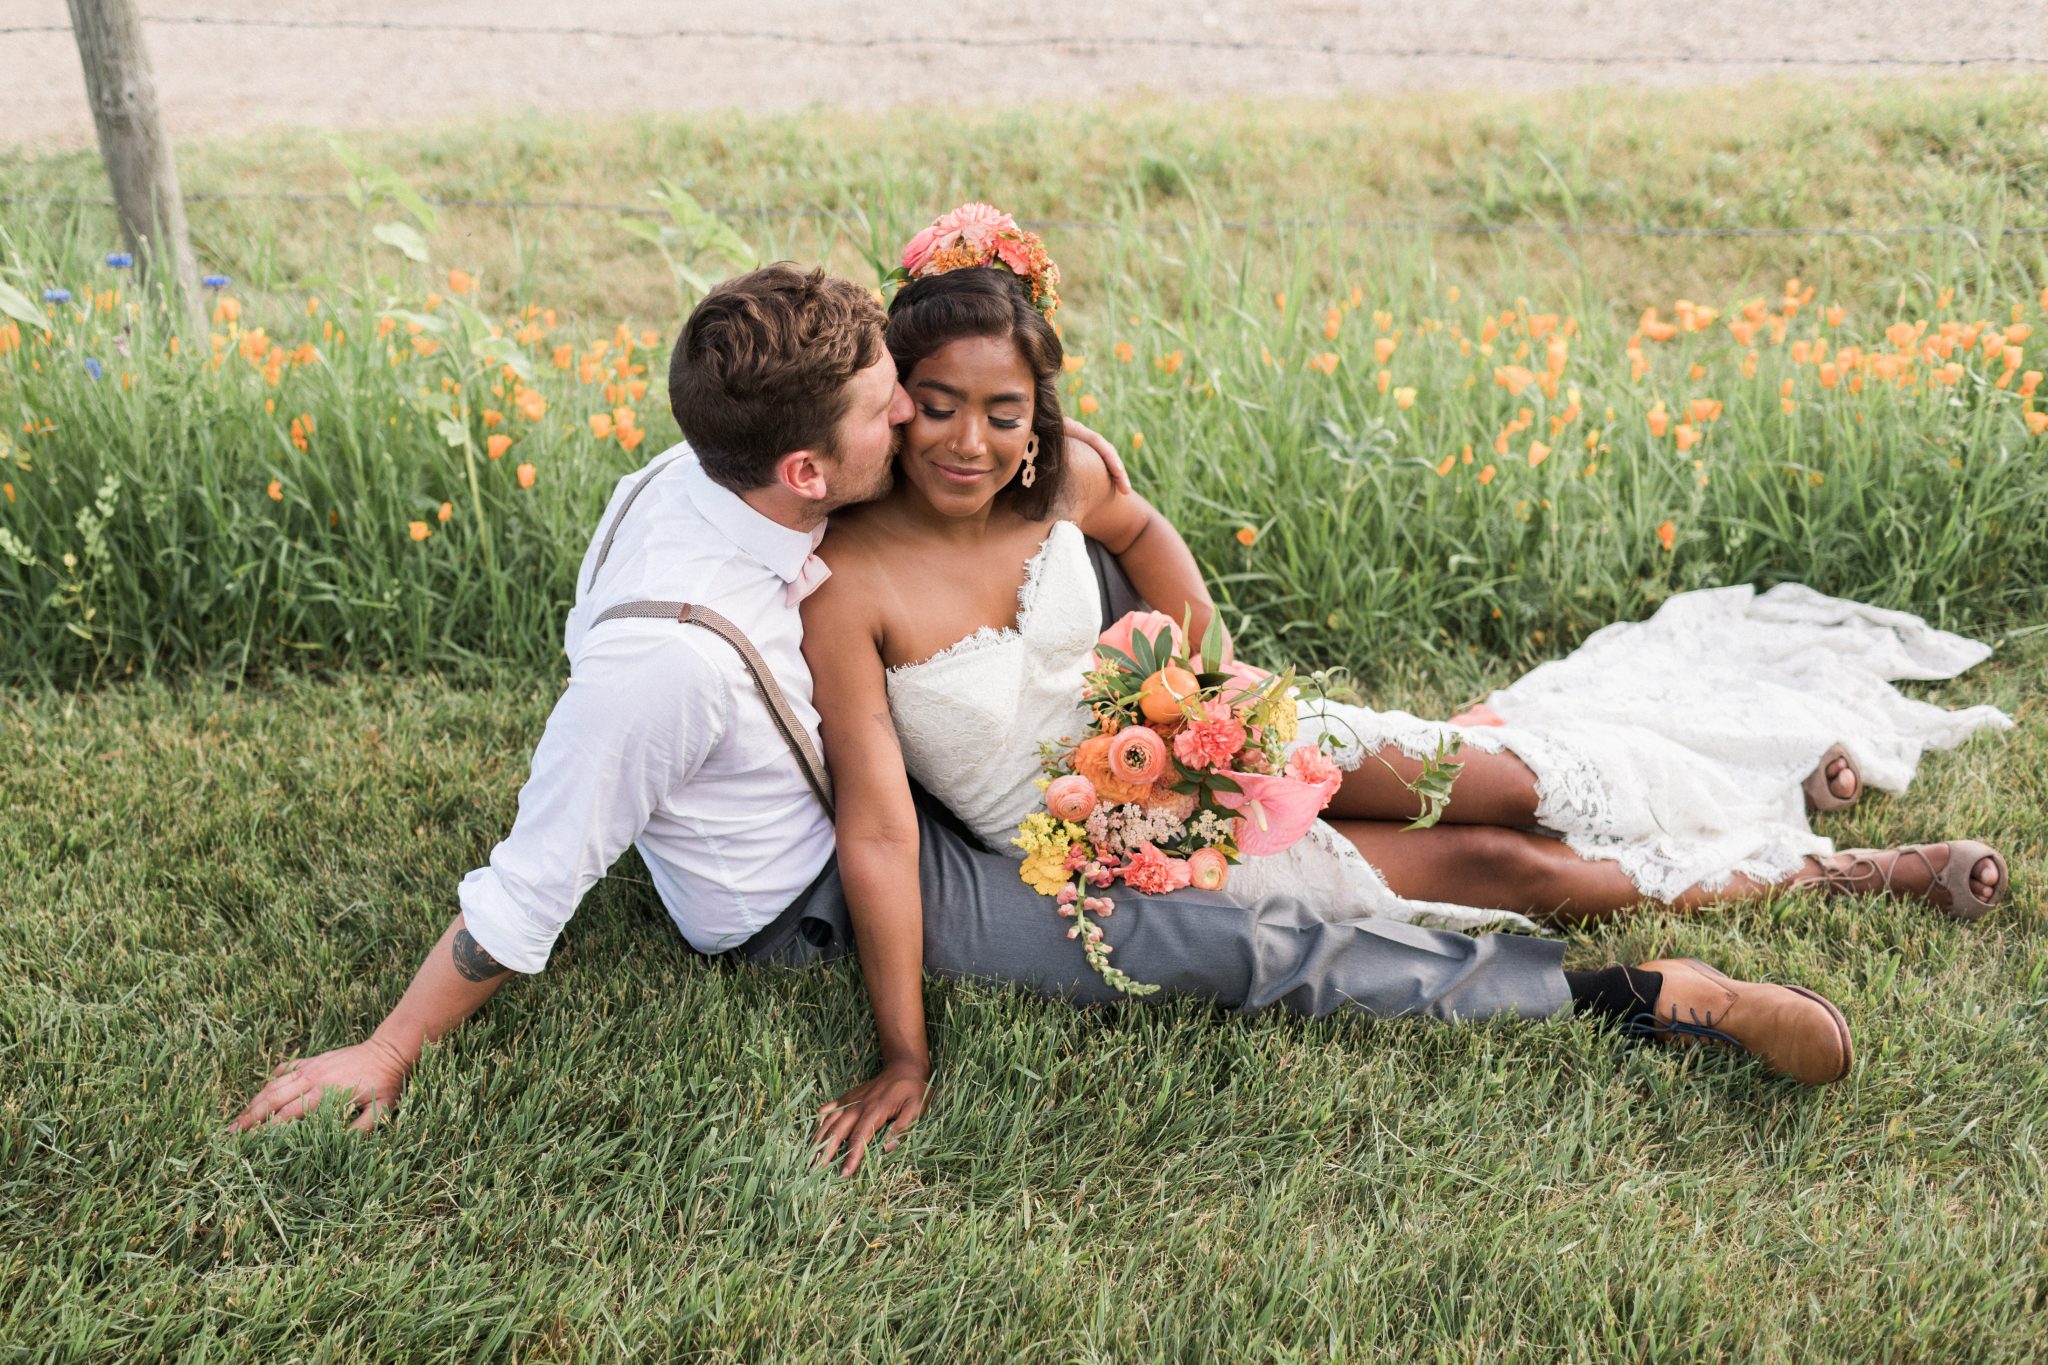 Bride and groom sit together in the grass for this countryside inspired wedding with tangerine flowers